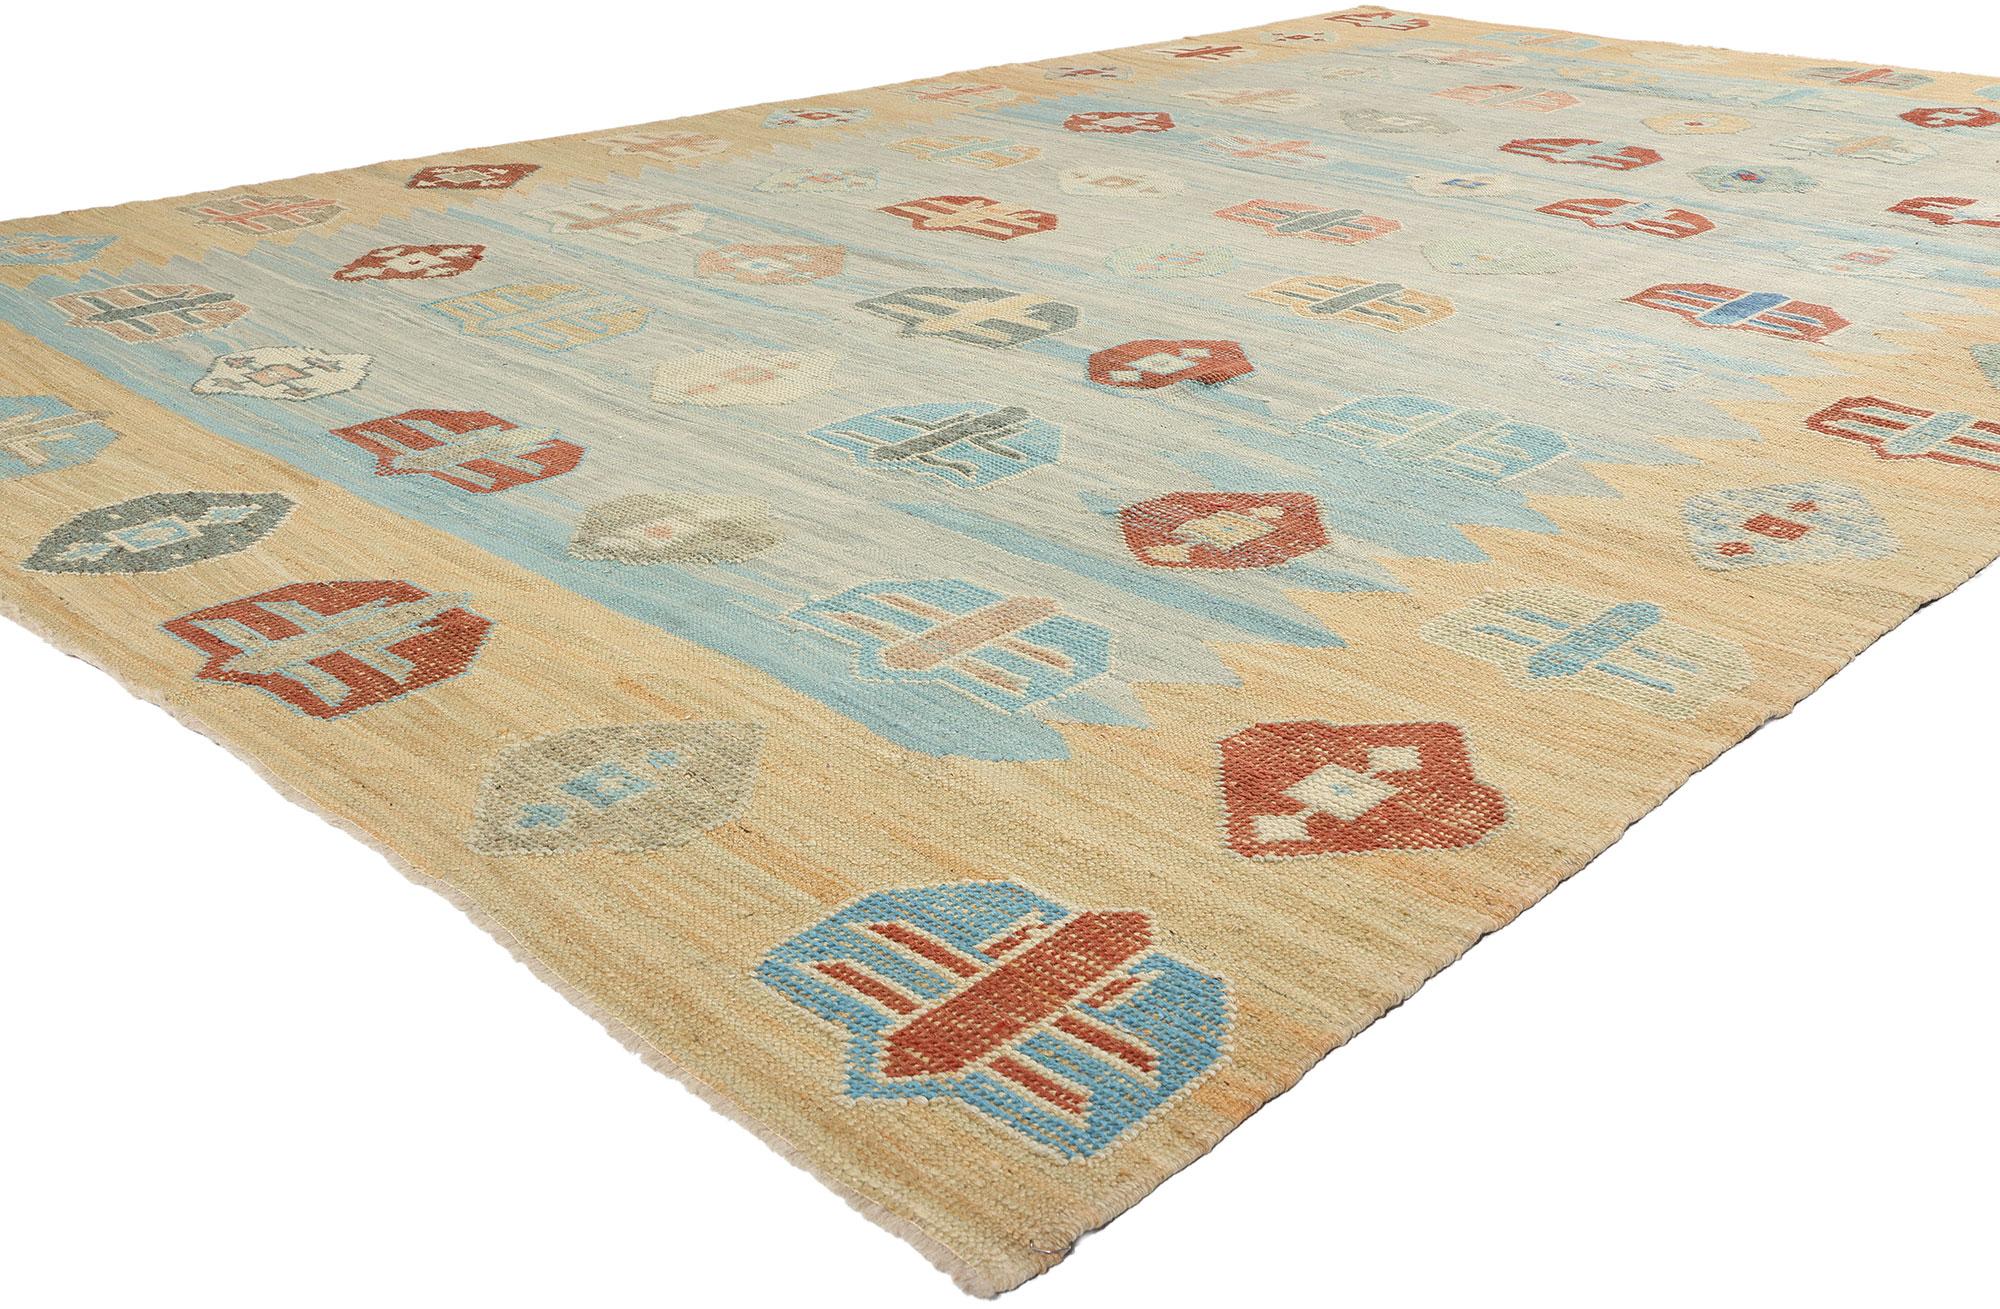 52209 New Large Turkish Kilim High-Low Rug 10'00 x 14'10. In a delightful departure from the usual vibrant hues associated with nomadic tribe culture, this hand-woven wool new contemporary Turkish Kilim rug offers a tranquil oasis with its tribal